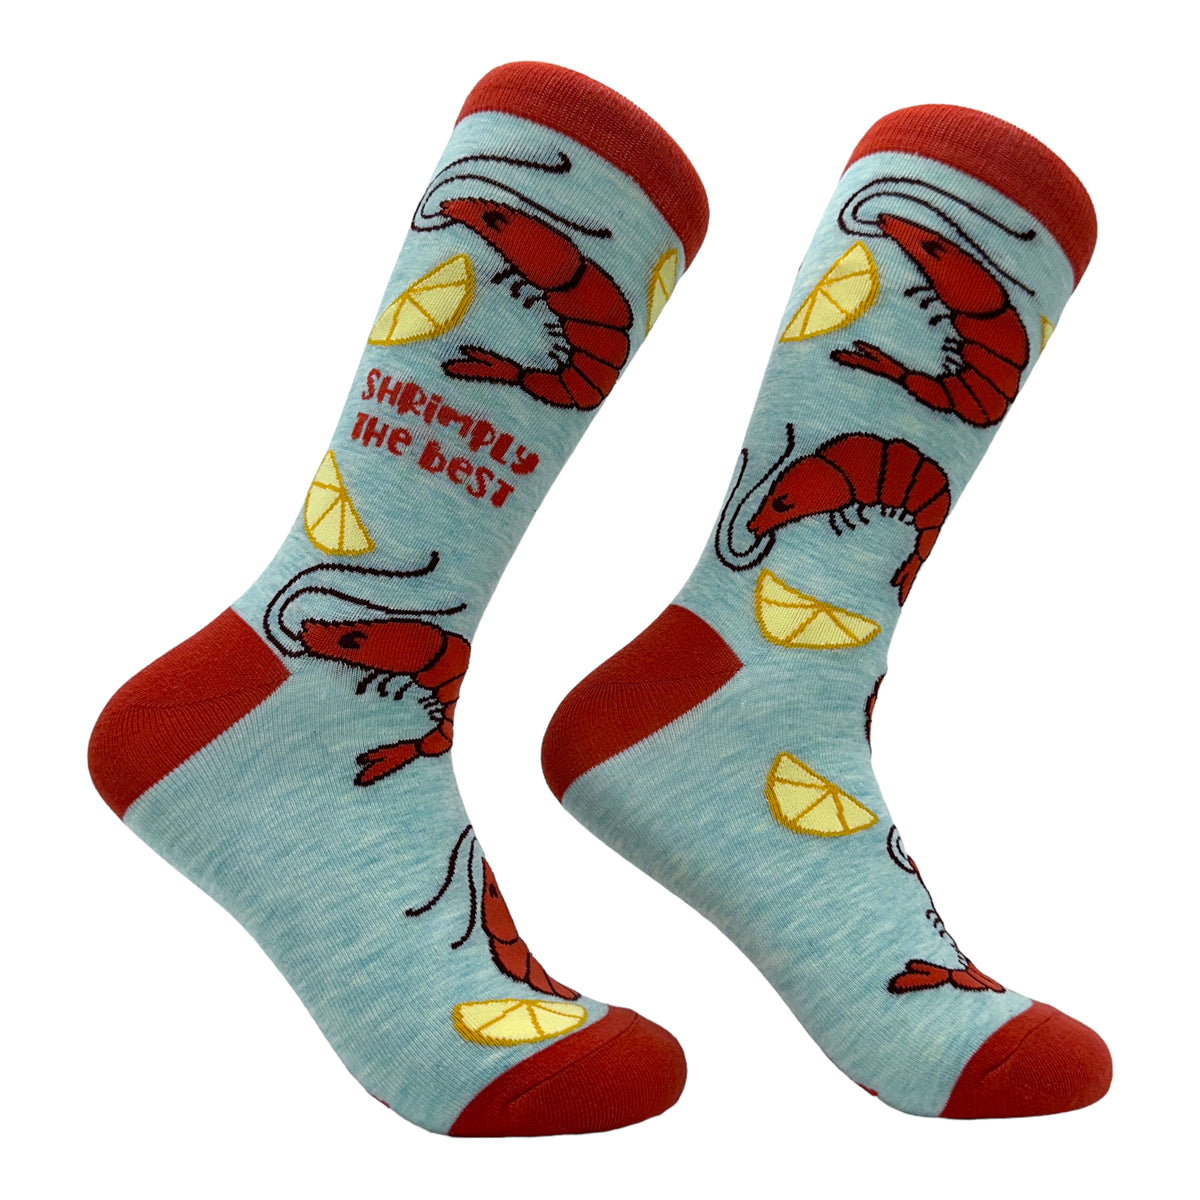 Funny Multi - Shrimply The Best Women&#39;s Shrimply The Best Sock Nerdy Food sarcastic Tee